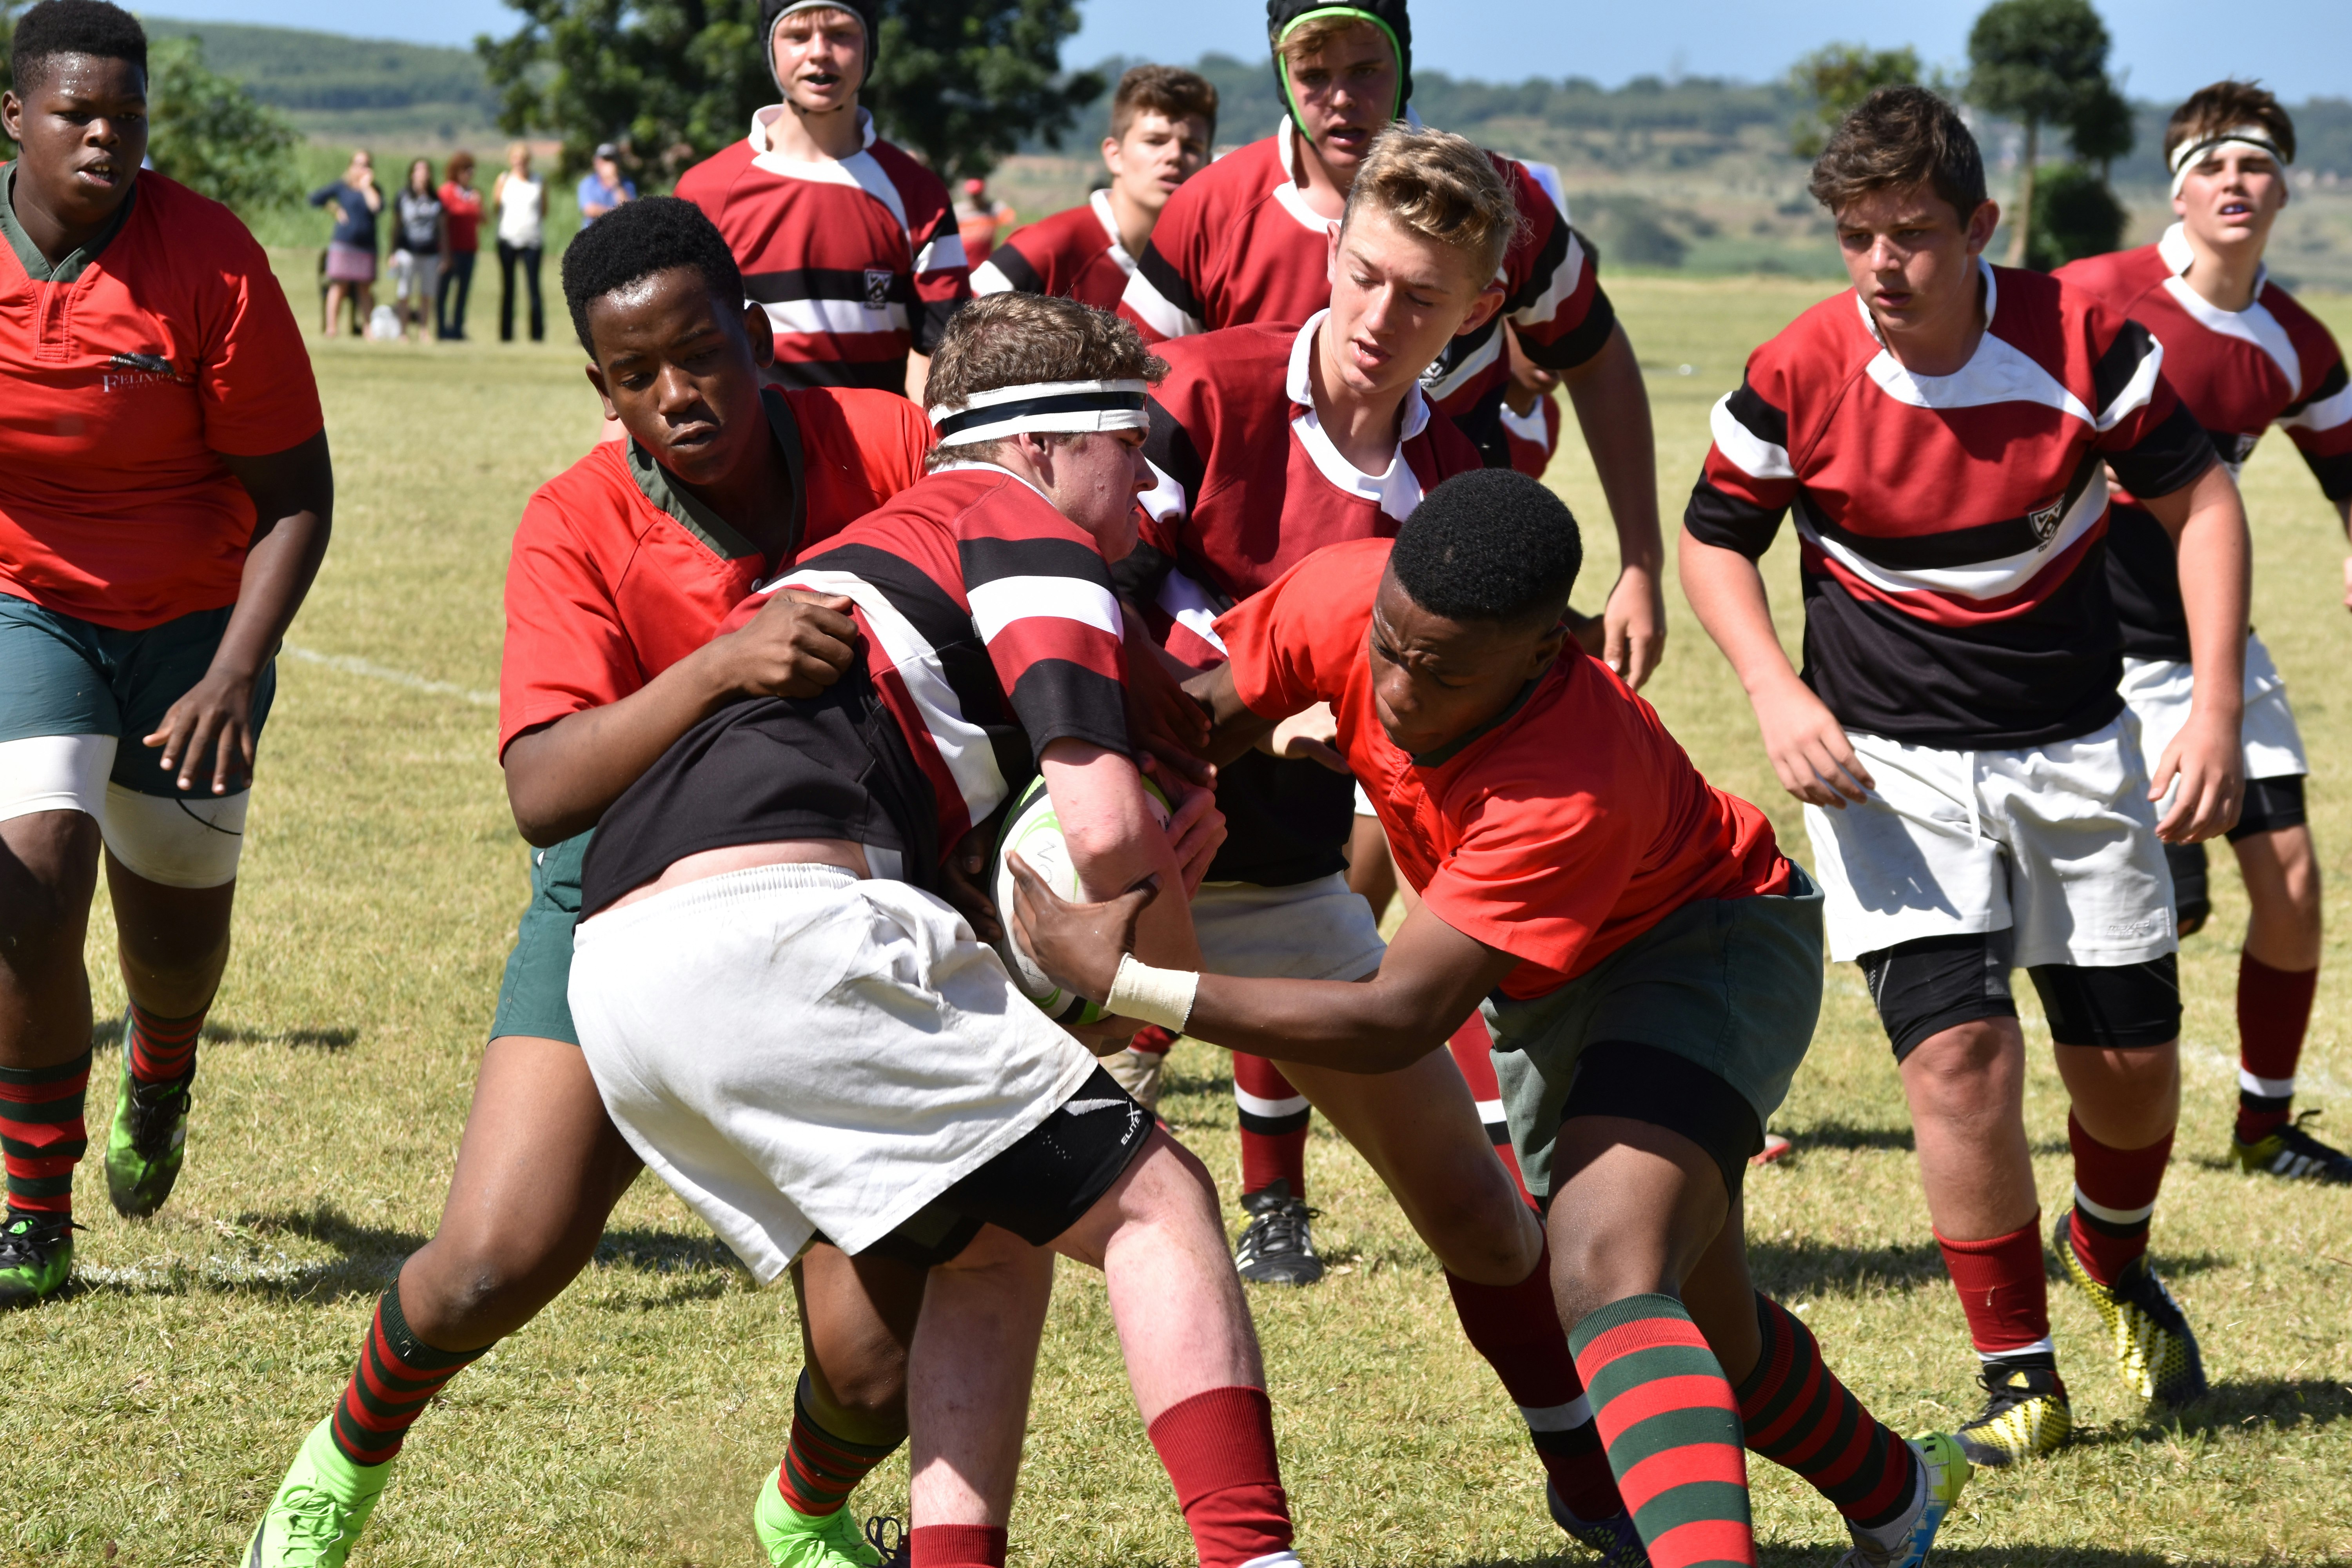 A young man struggles to hold onto the ball as he is tackled by other boys to wrestle the rugby ball away from him during a school boys rugby game in Durban South Africa. 